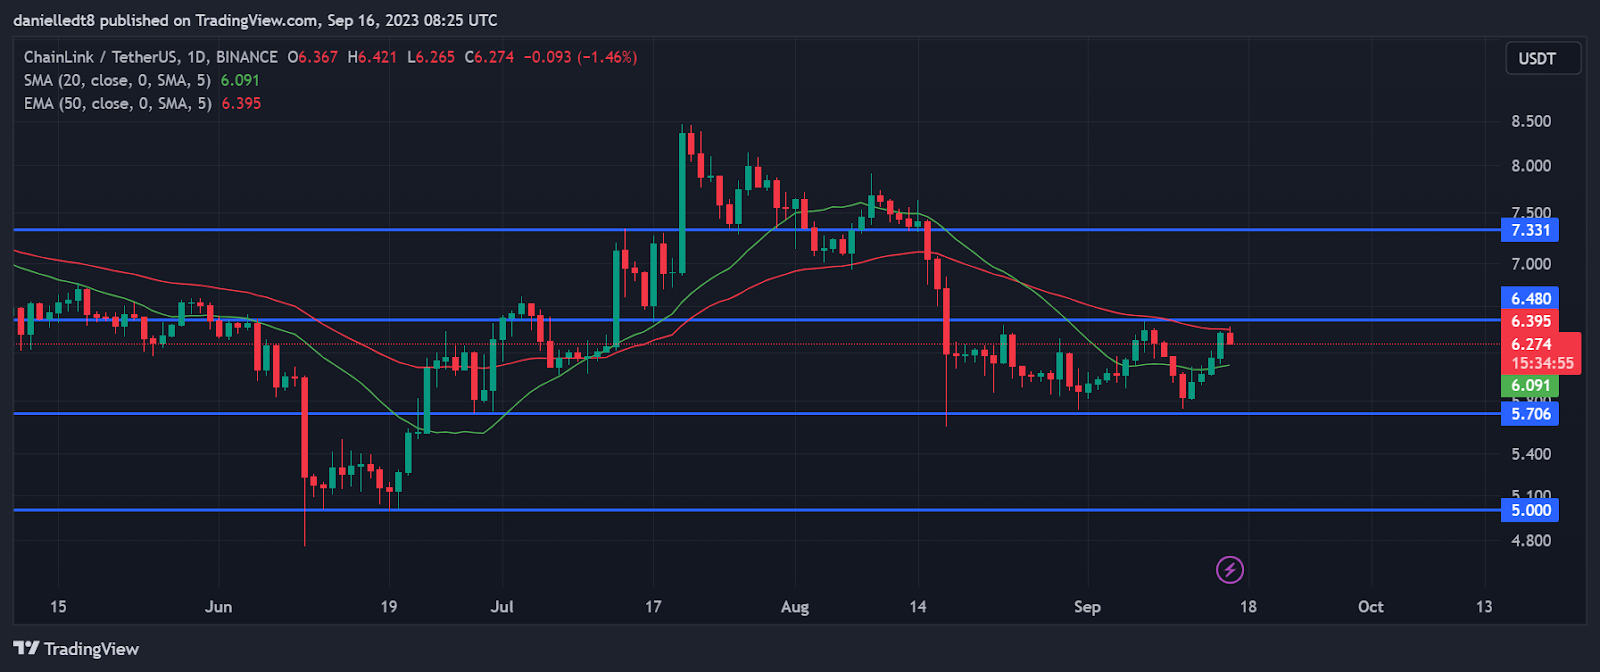 Daily chart for LINK/USDT (Source: TradingView)